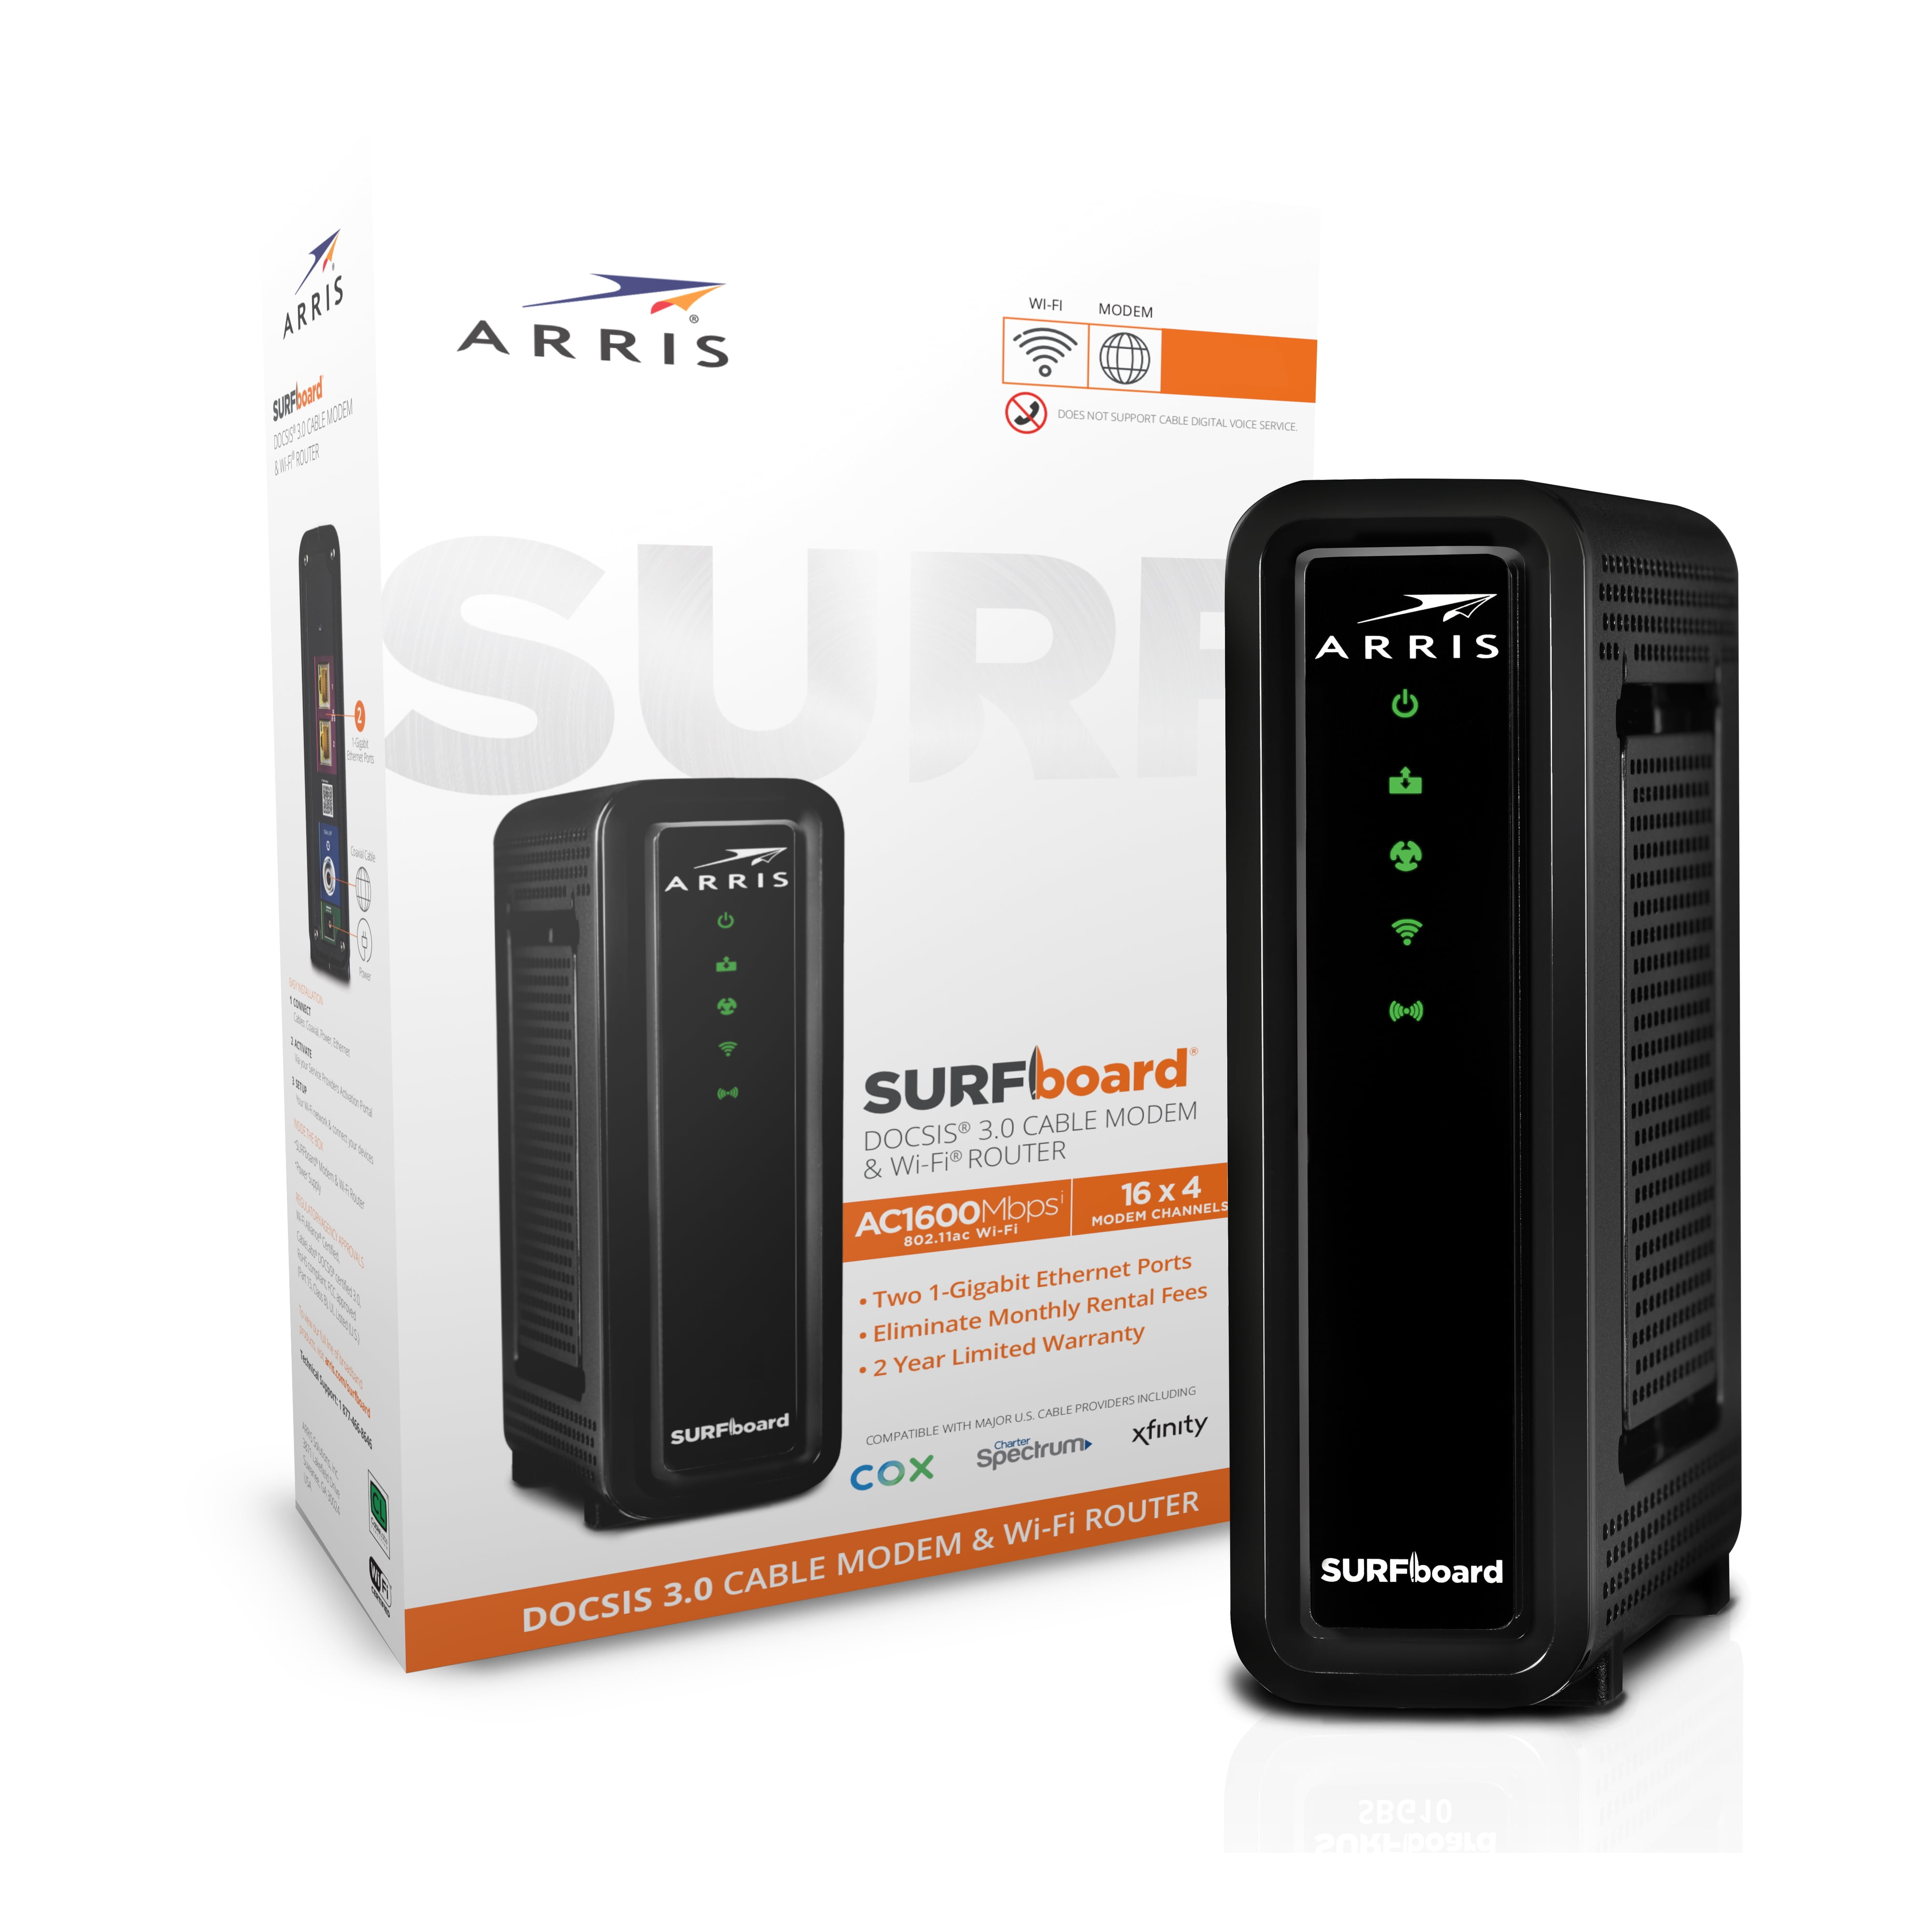 Spectrum ARRIS SURFboard Cox & more Certified for Comcast Xfinity 1 Gbps Max Speed DOCSIS 3.0 Cable Modem Plus AC2350 Dual Band Wi-Fi Router SBG7400AC2 24x8 